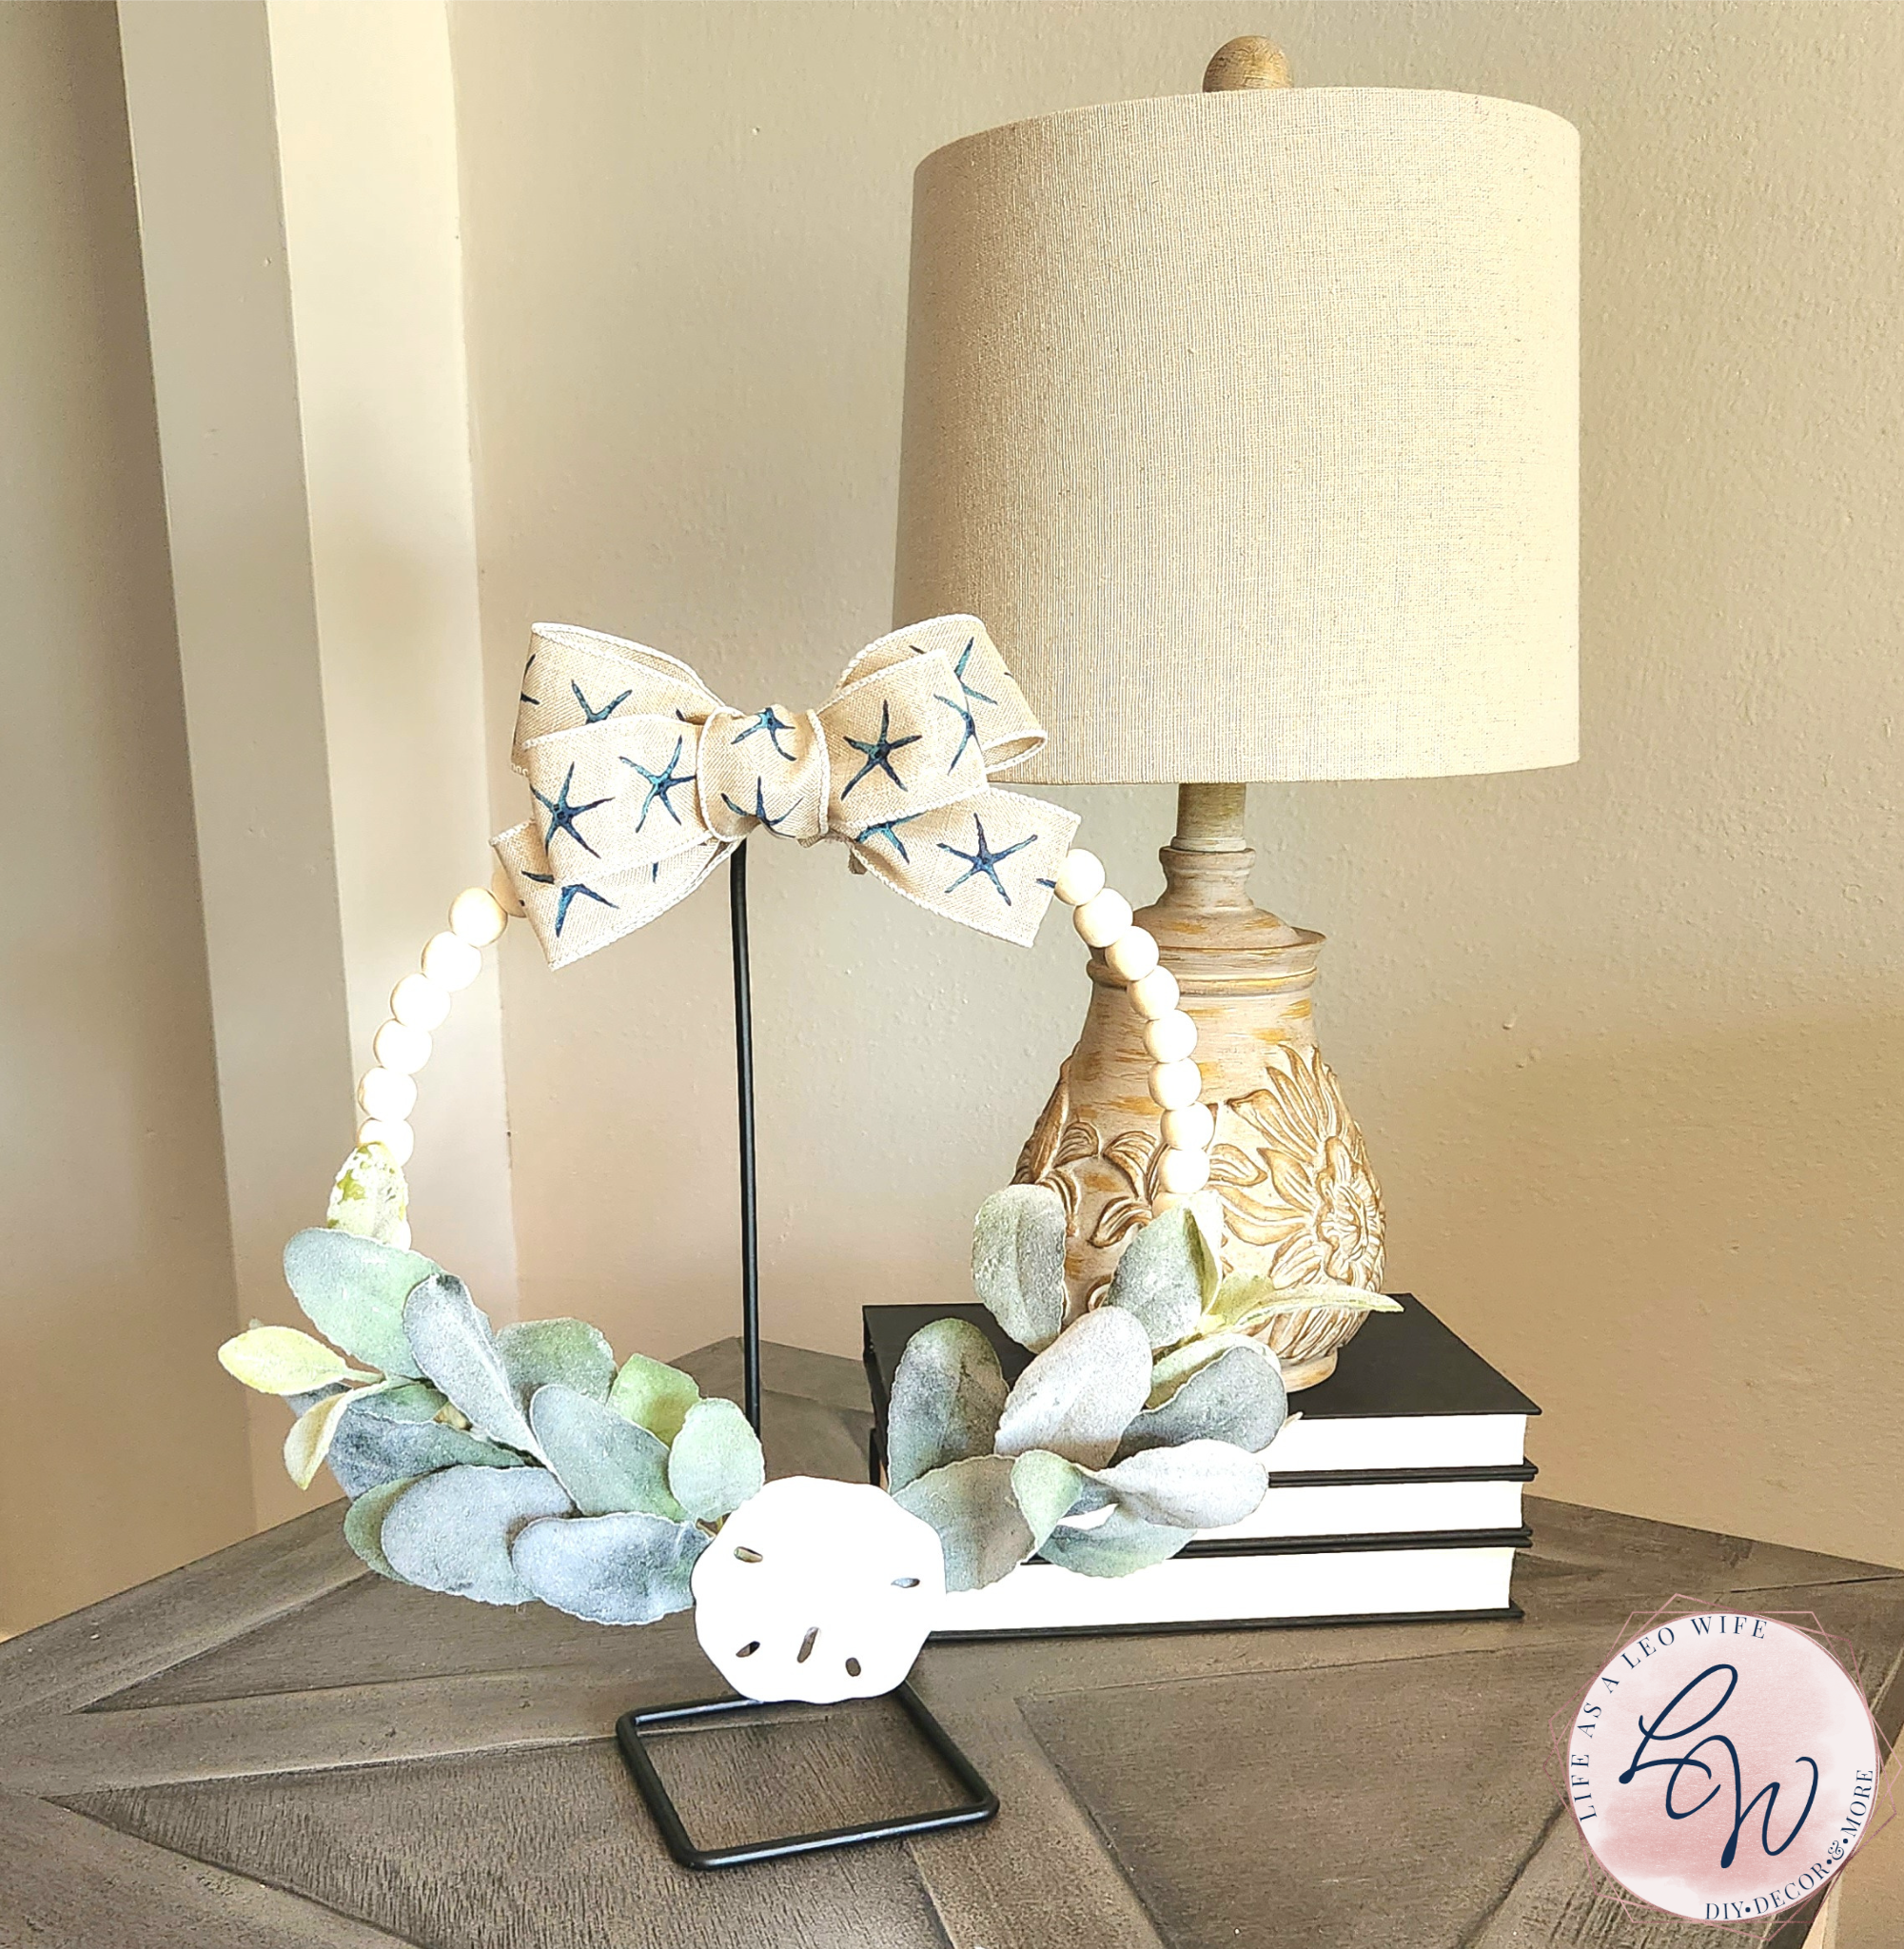 Coastal wood bead wreath with lamb's ear greenery across the bottom, a sand dollar in the bottom center, and topped with a starfish print bow, hung on a wreath stand.